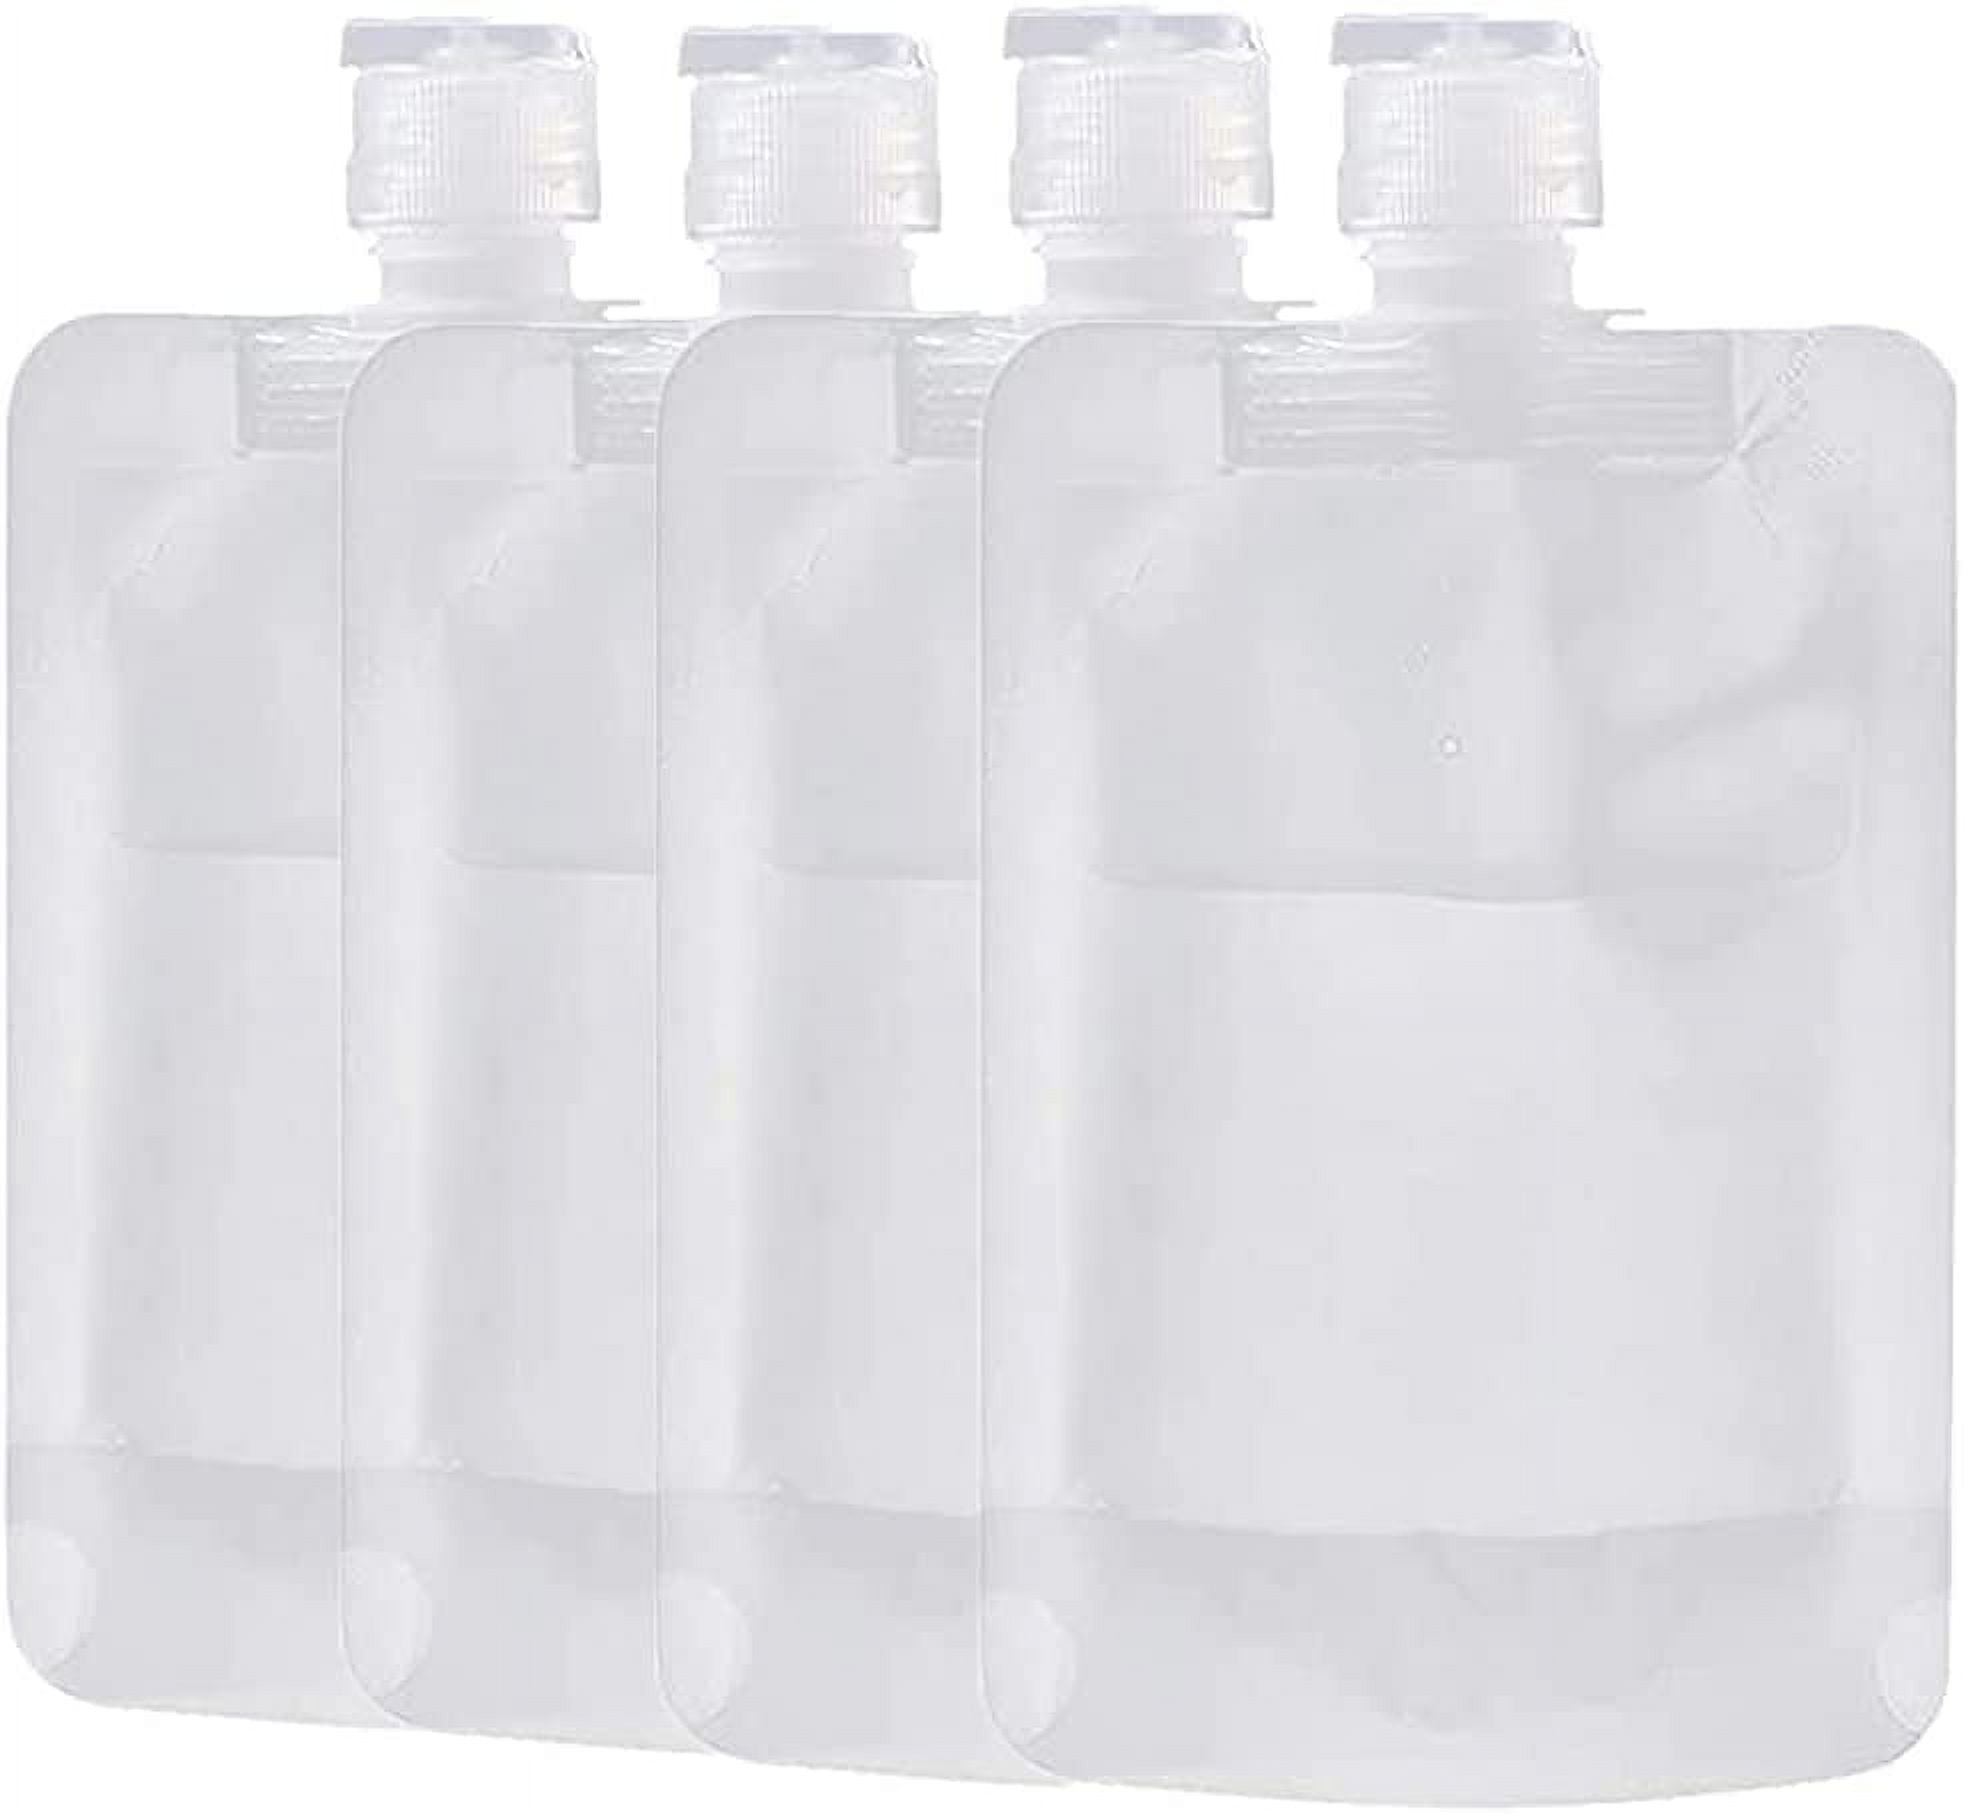 4pack Portable Travel Fluid Makeup Packing Bag with Labels Refillable  Travel Pouches-Sub Bags for Travel Tsa Approved Leakproof Toiletries  Containers